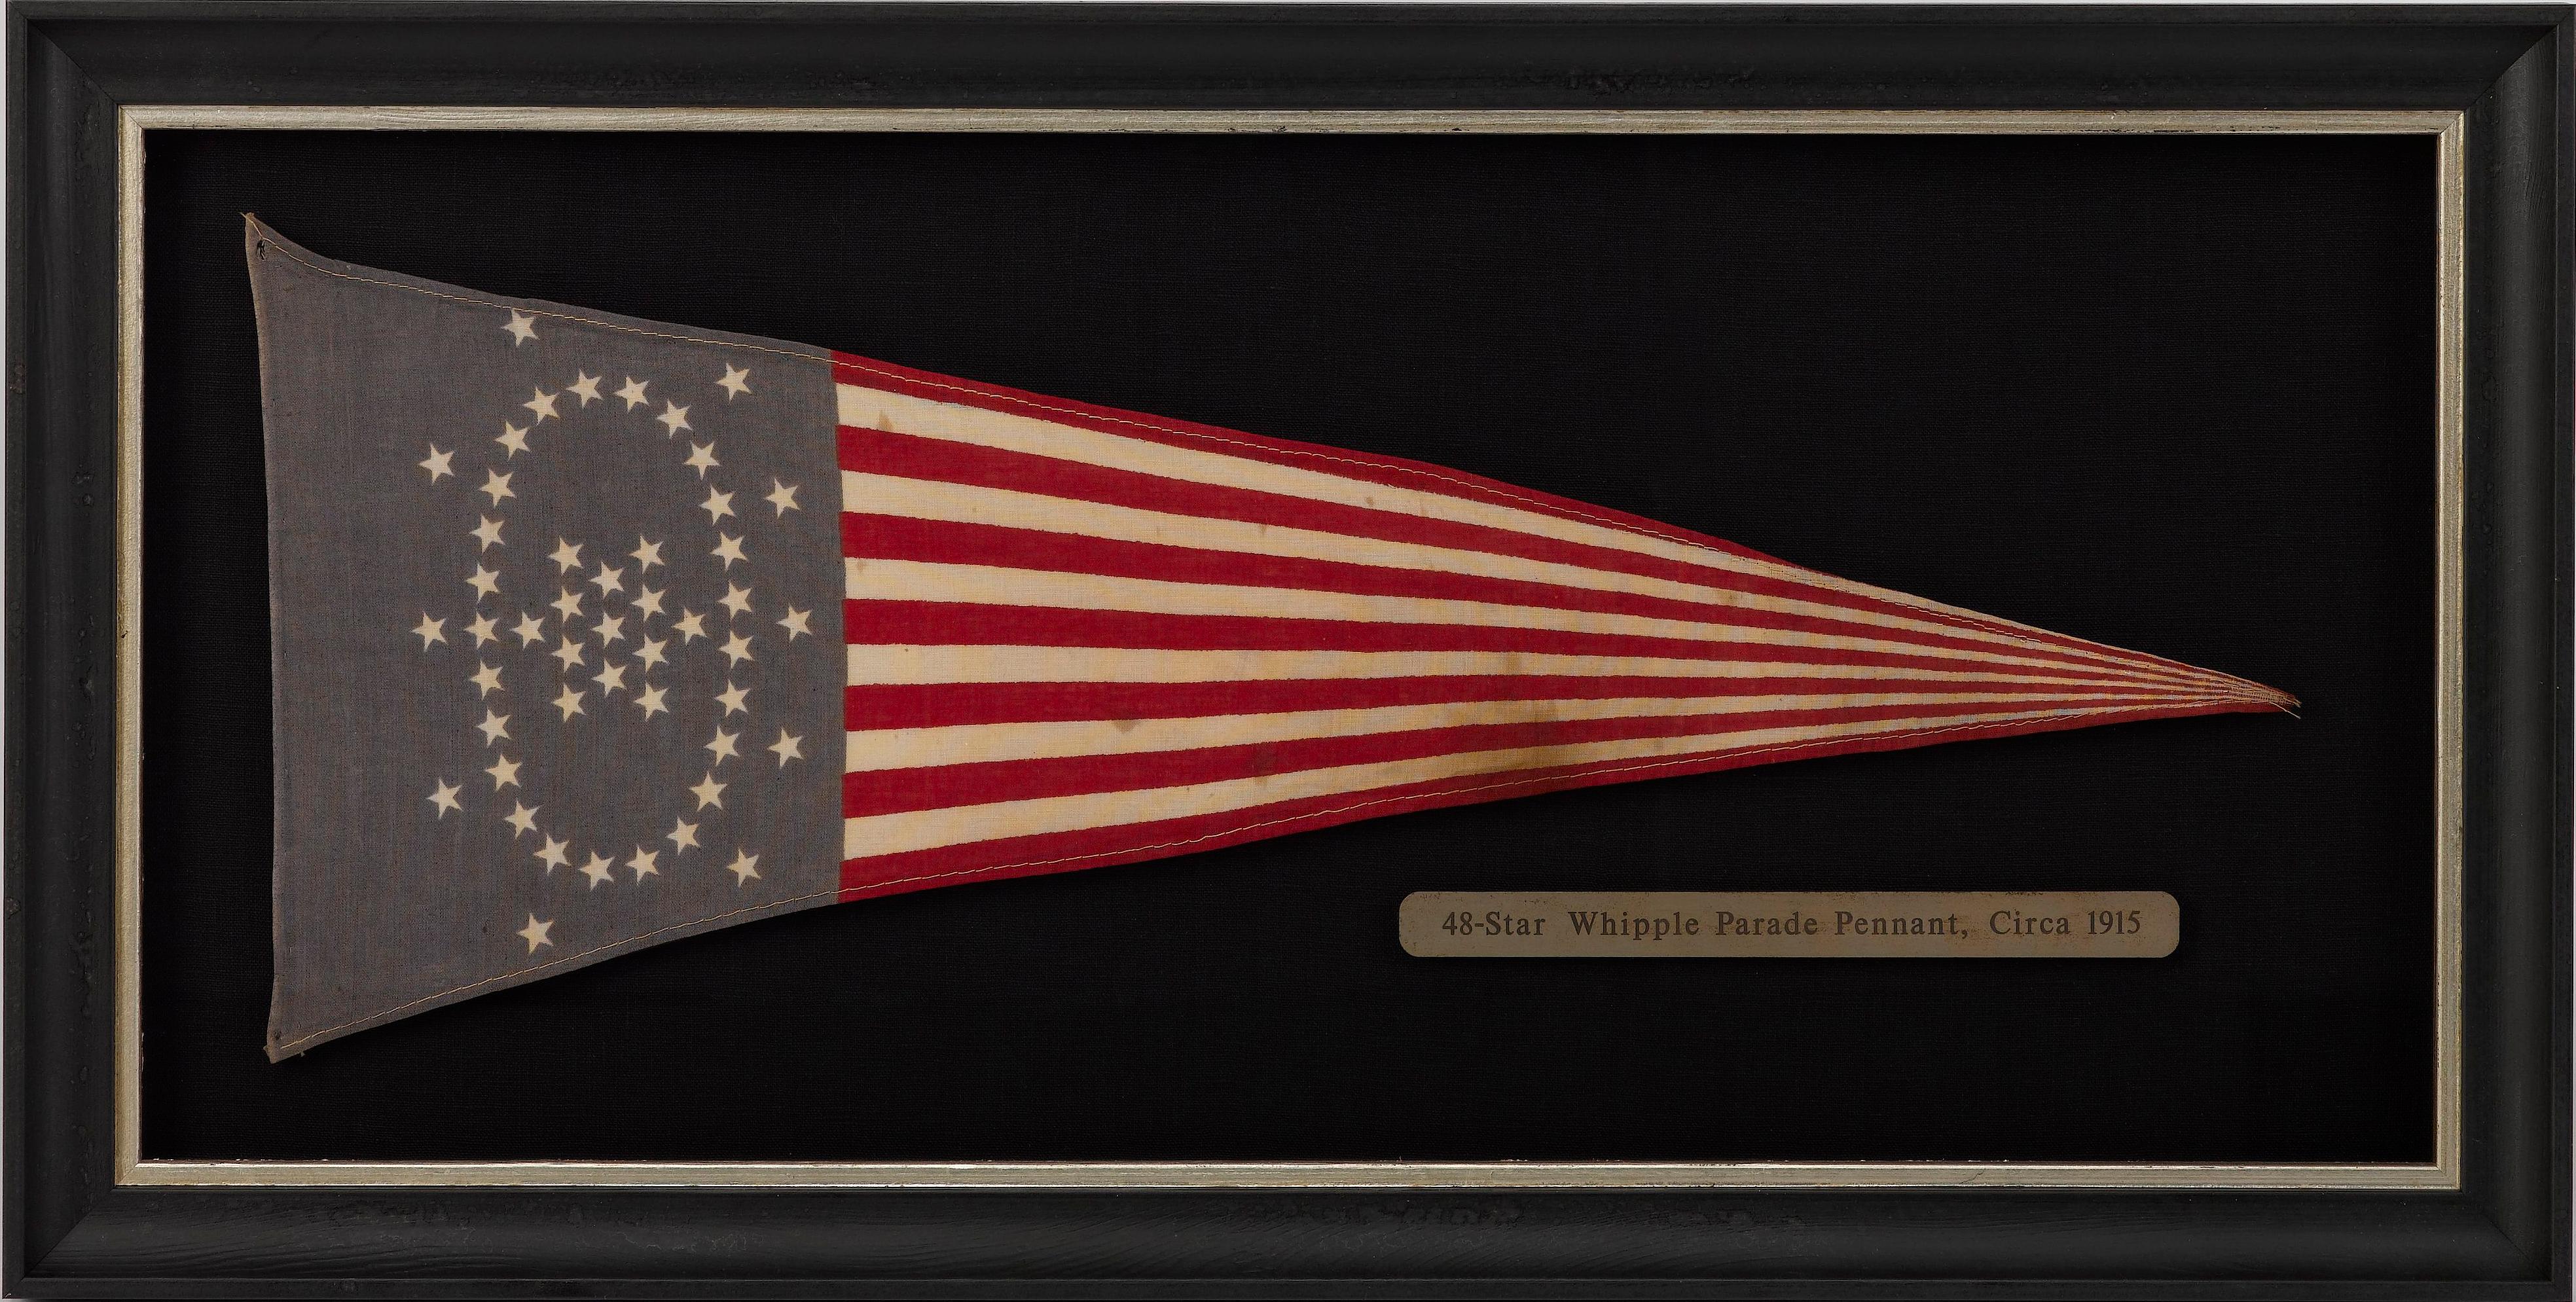 This is a beautiful example of a printed Whipple star flag pennant. In the first decade of the twentieth century, a contest to design a classical style of American heraldry was held. The flag designed by Wayne Whipple, a well-known author of popular